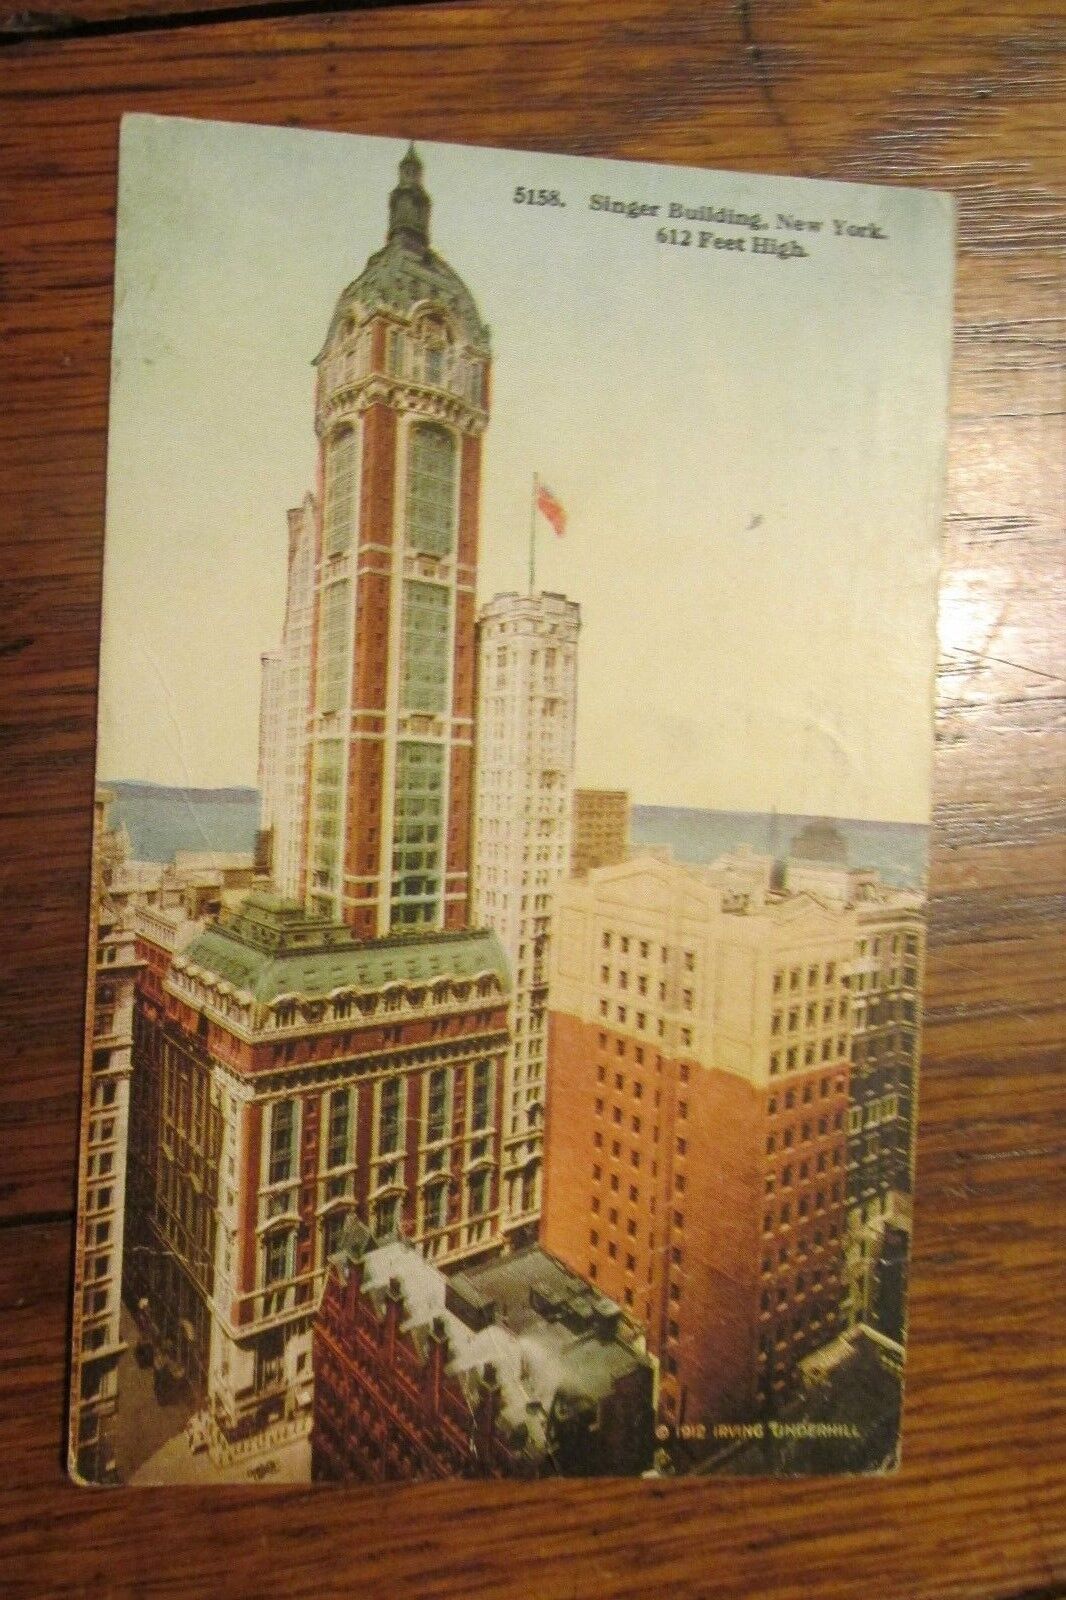 a43 Antique vintage postcard Singer Building New York NY 1912 Irving Undermill